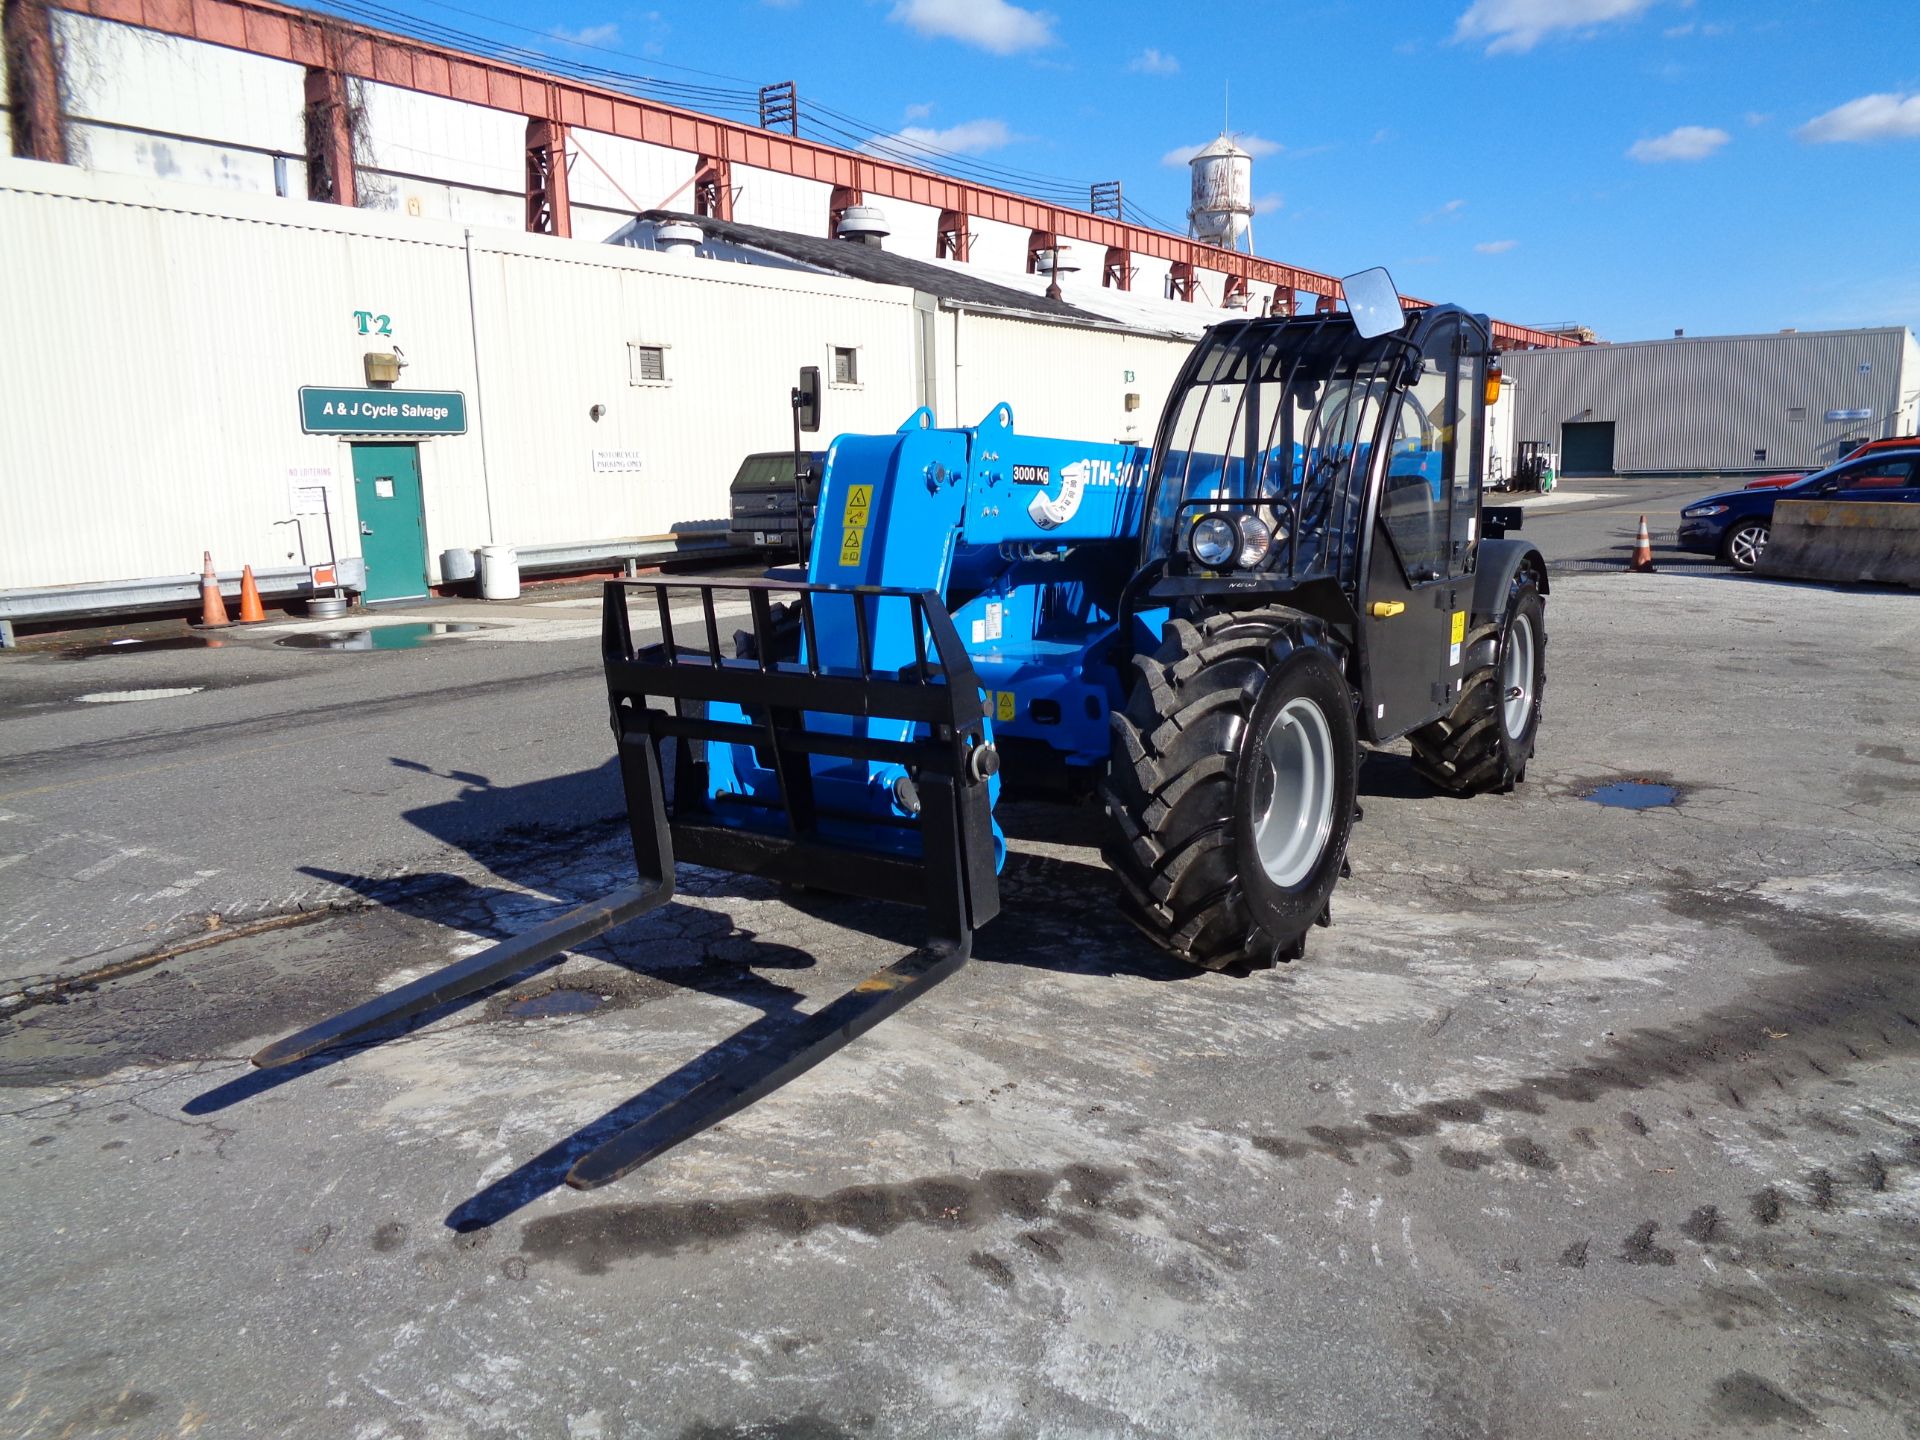 New Unused 2018 Genie GTH3007 Telescopic Forklift 6,600 lbs - Enclosed Cab - Image 16 of 23